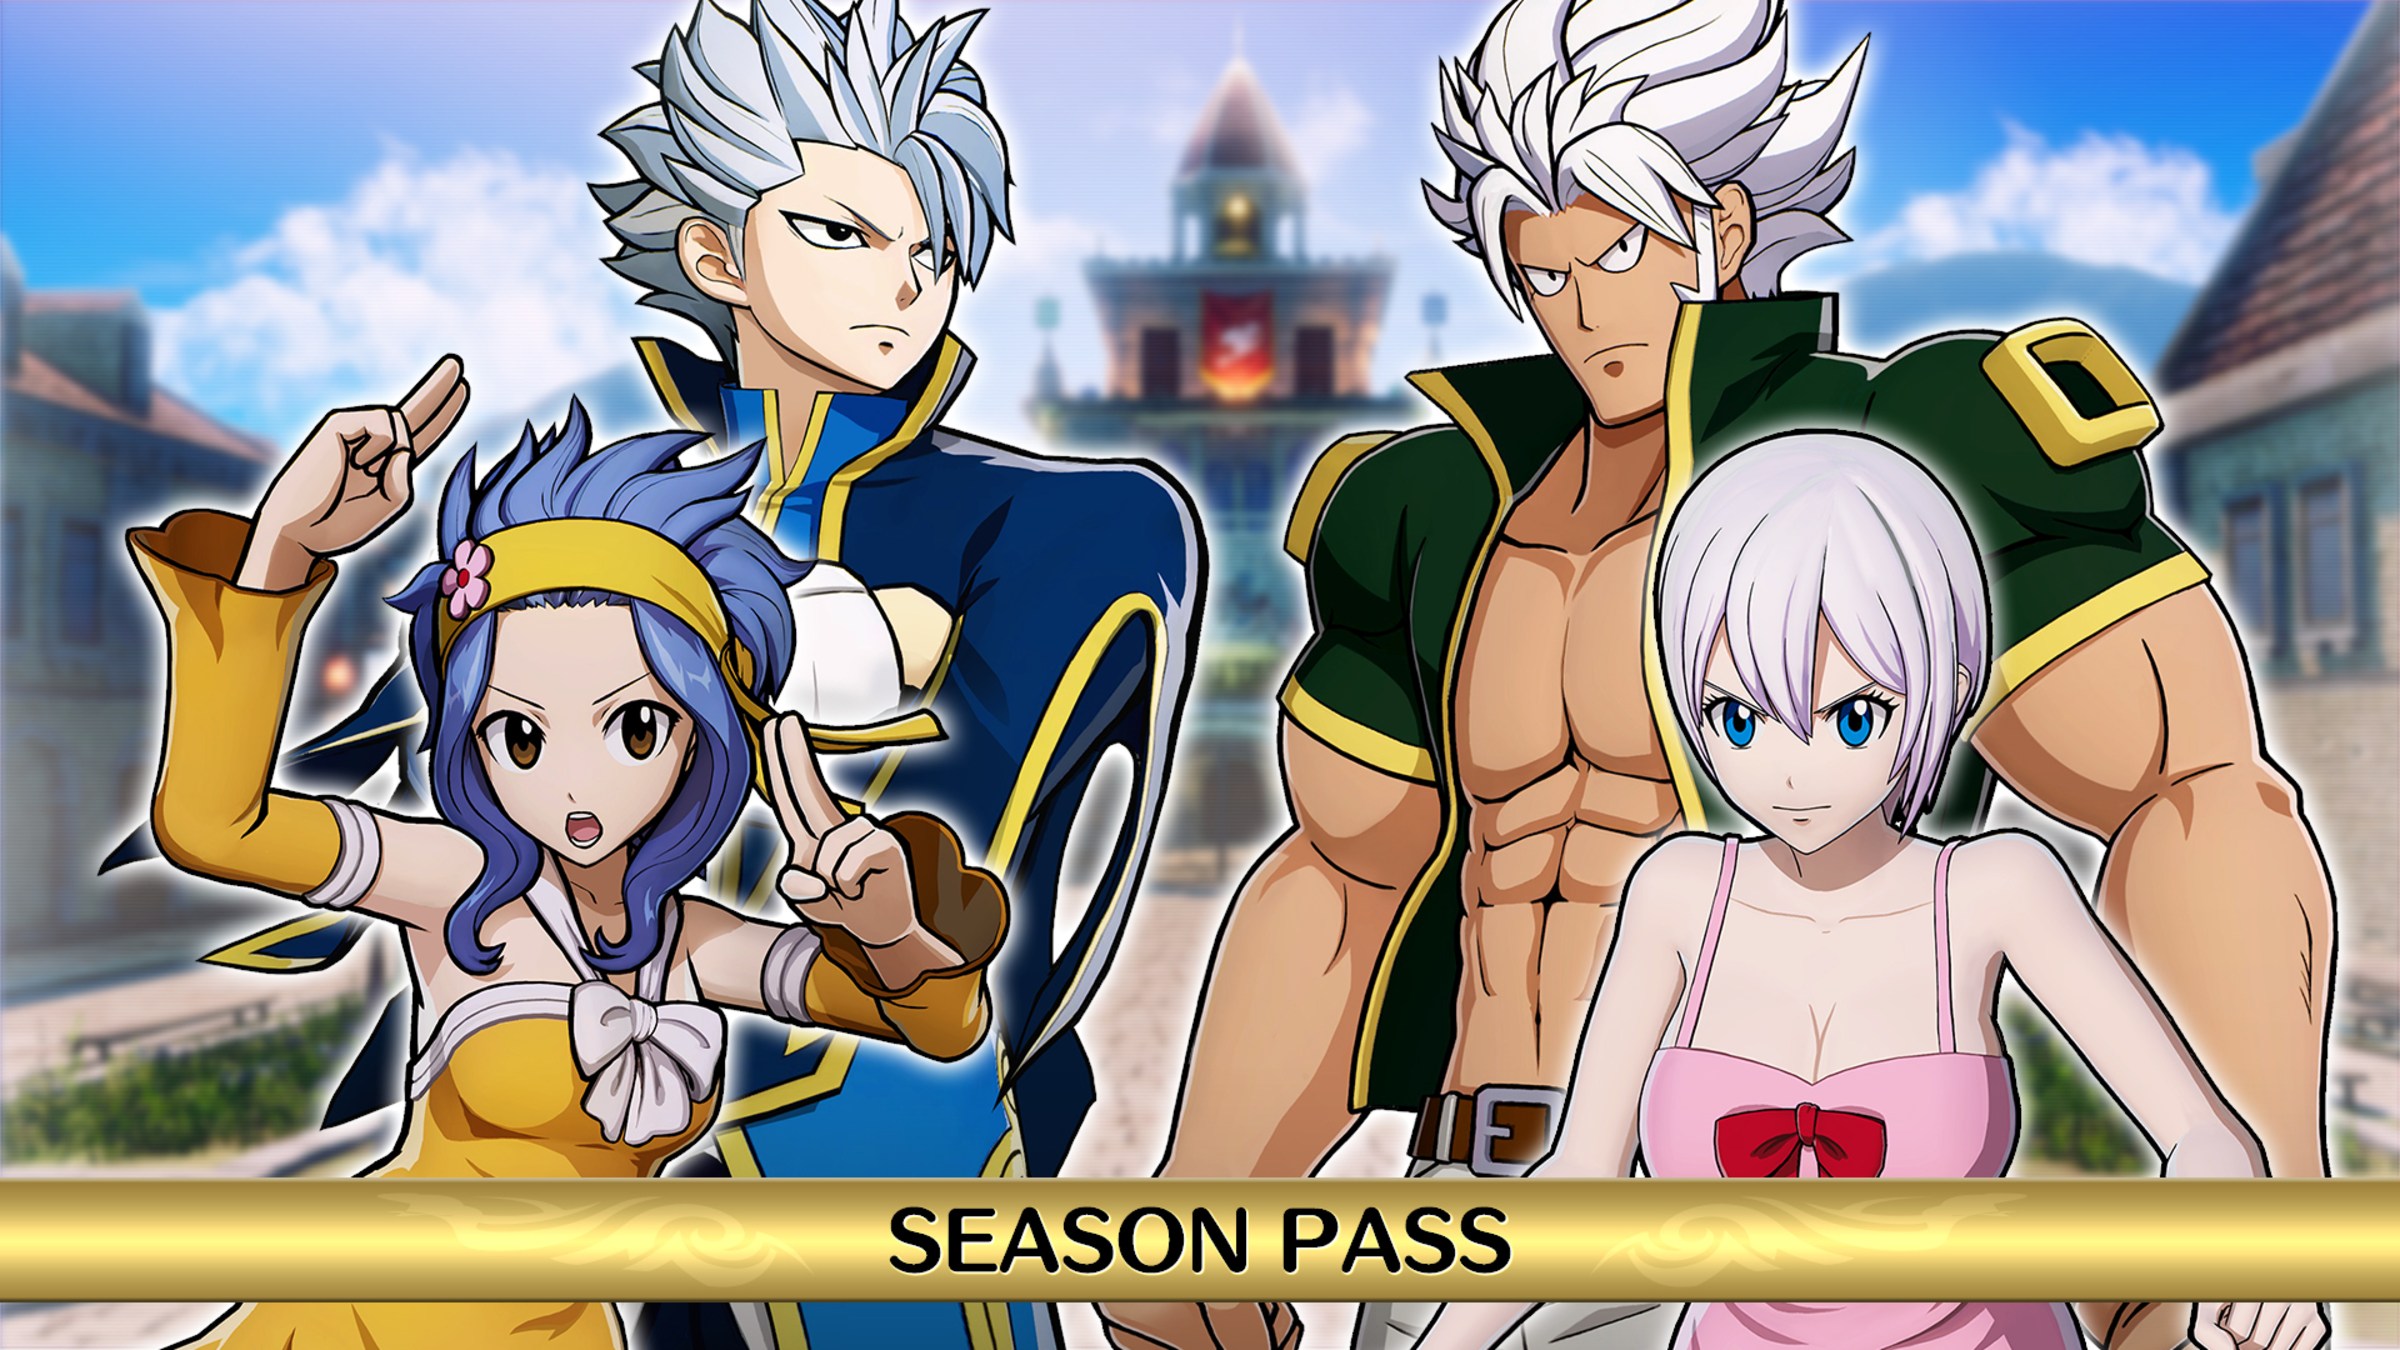 FAIRY TAIL Season Pass for Nintendo Switch - Nintendo Official Site